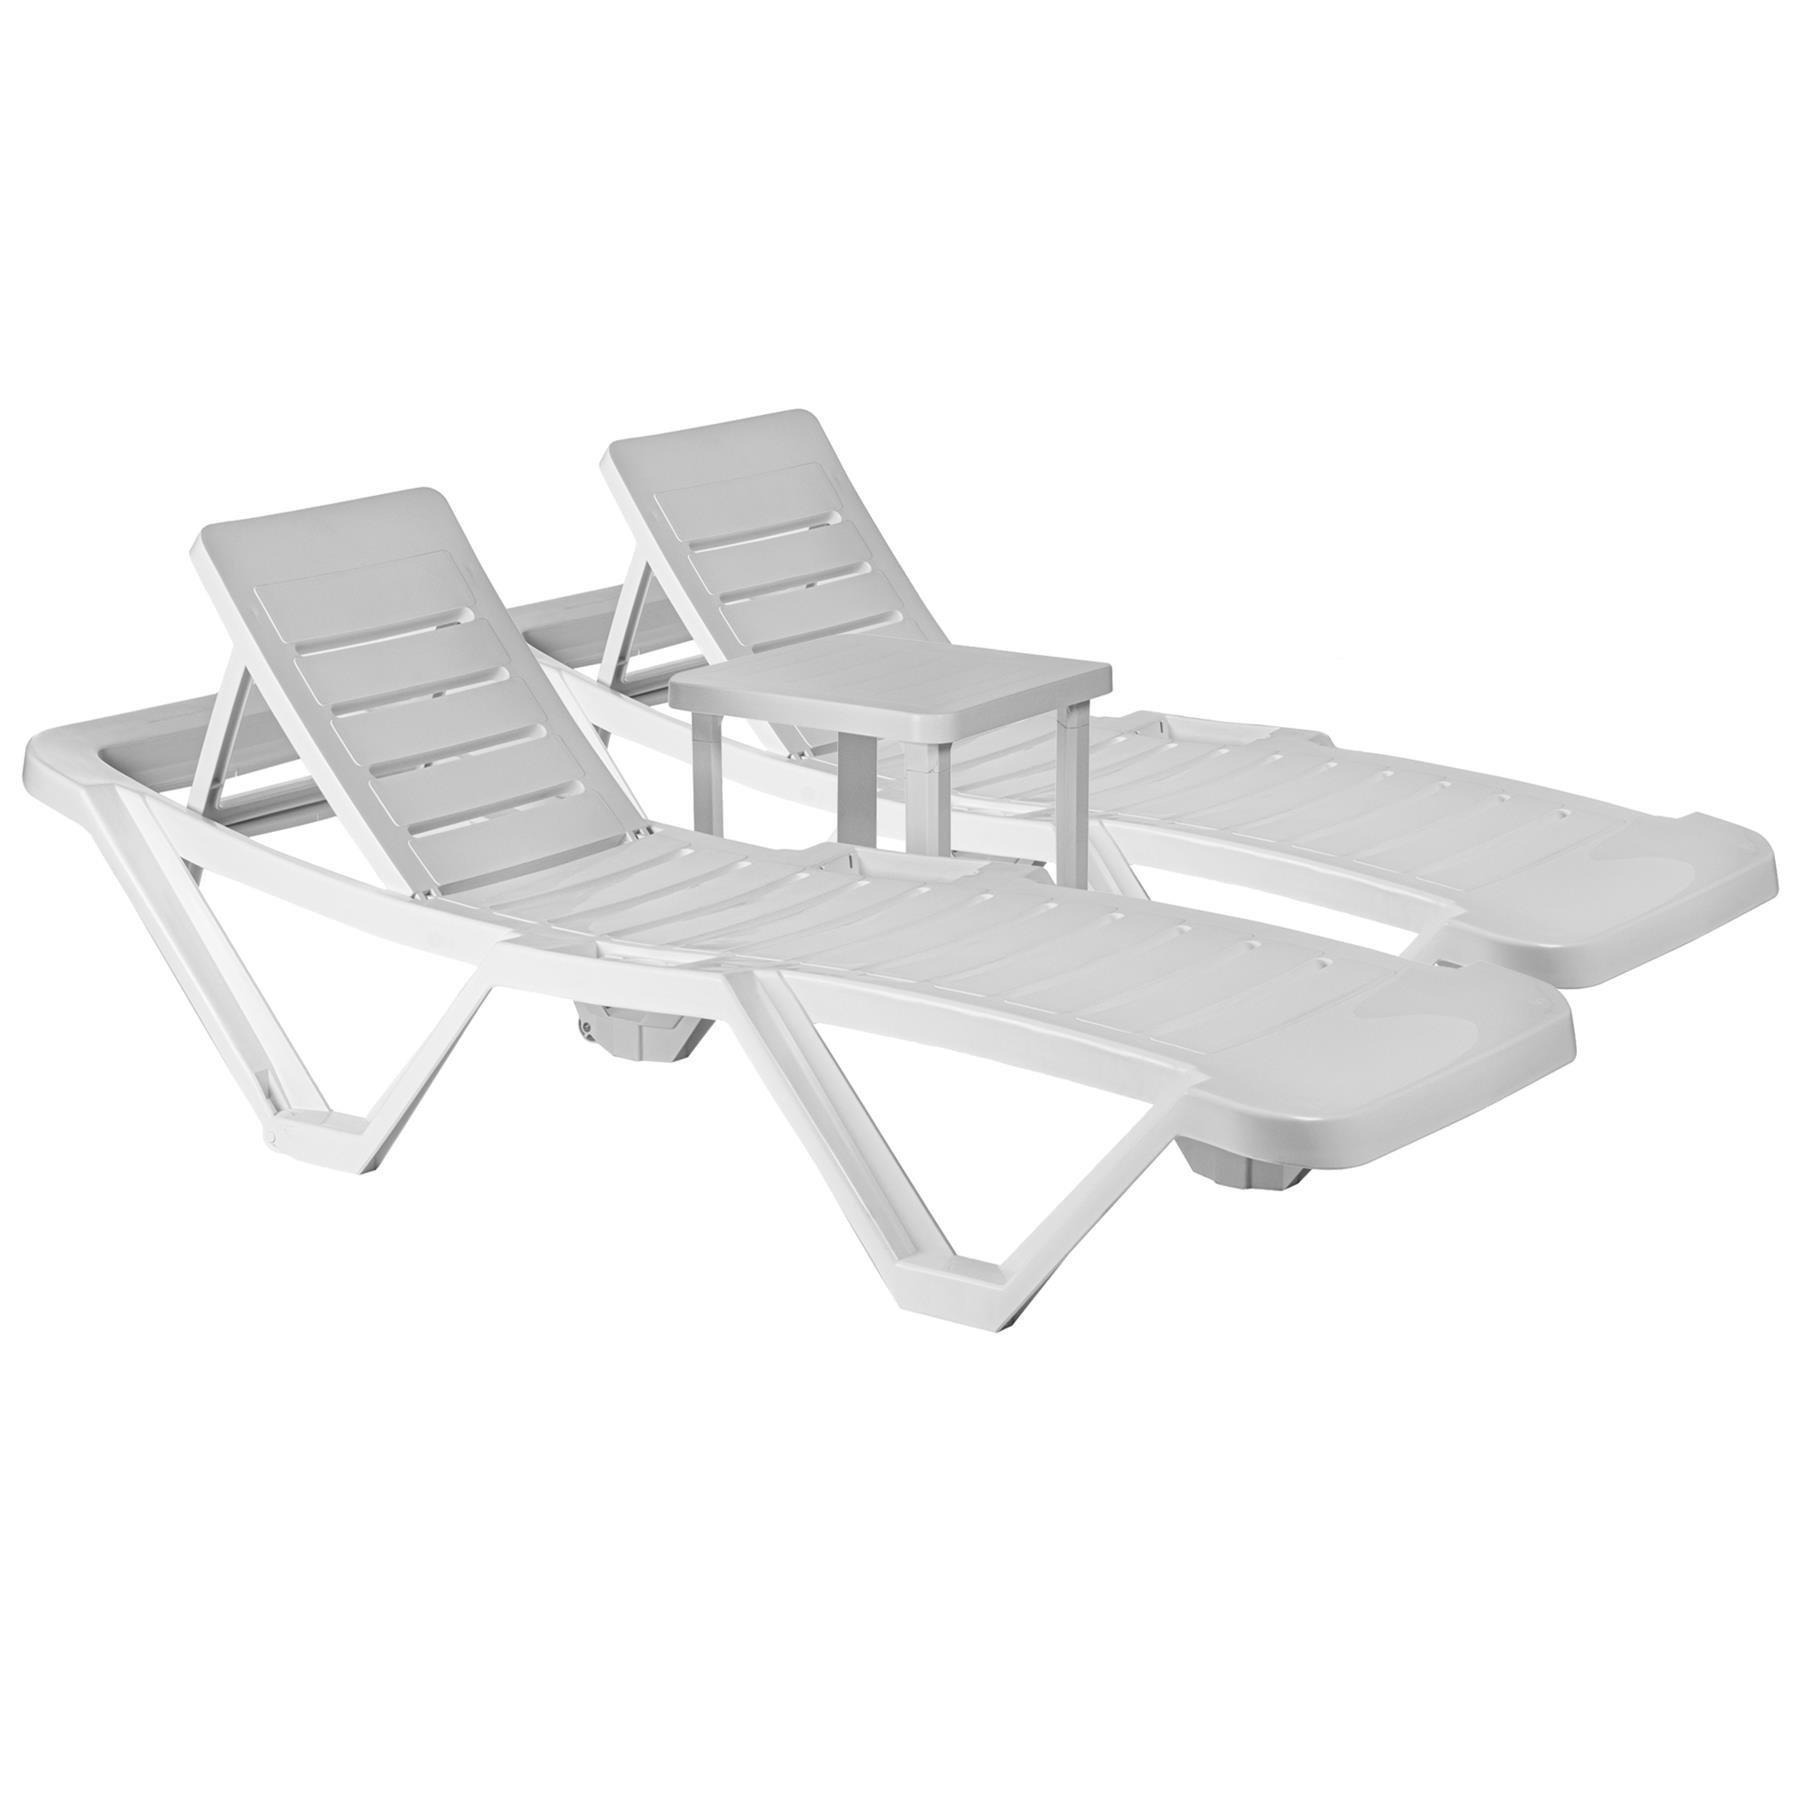 3 Piece Master Sun Loungers & Side Table Set - image 1